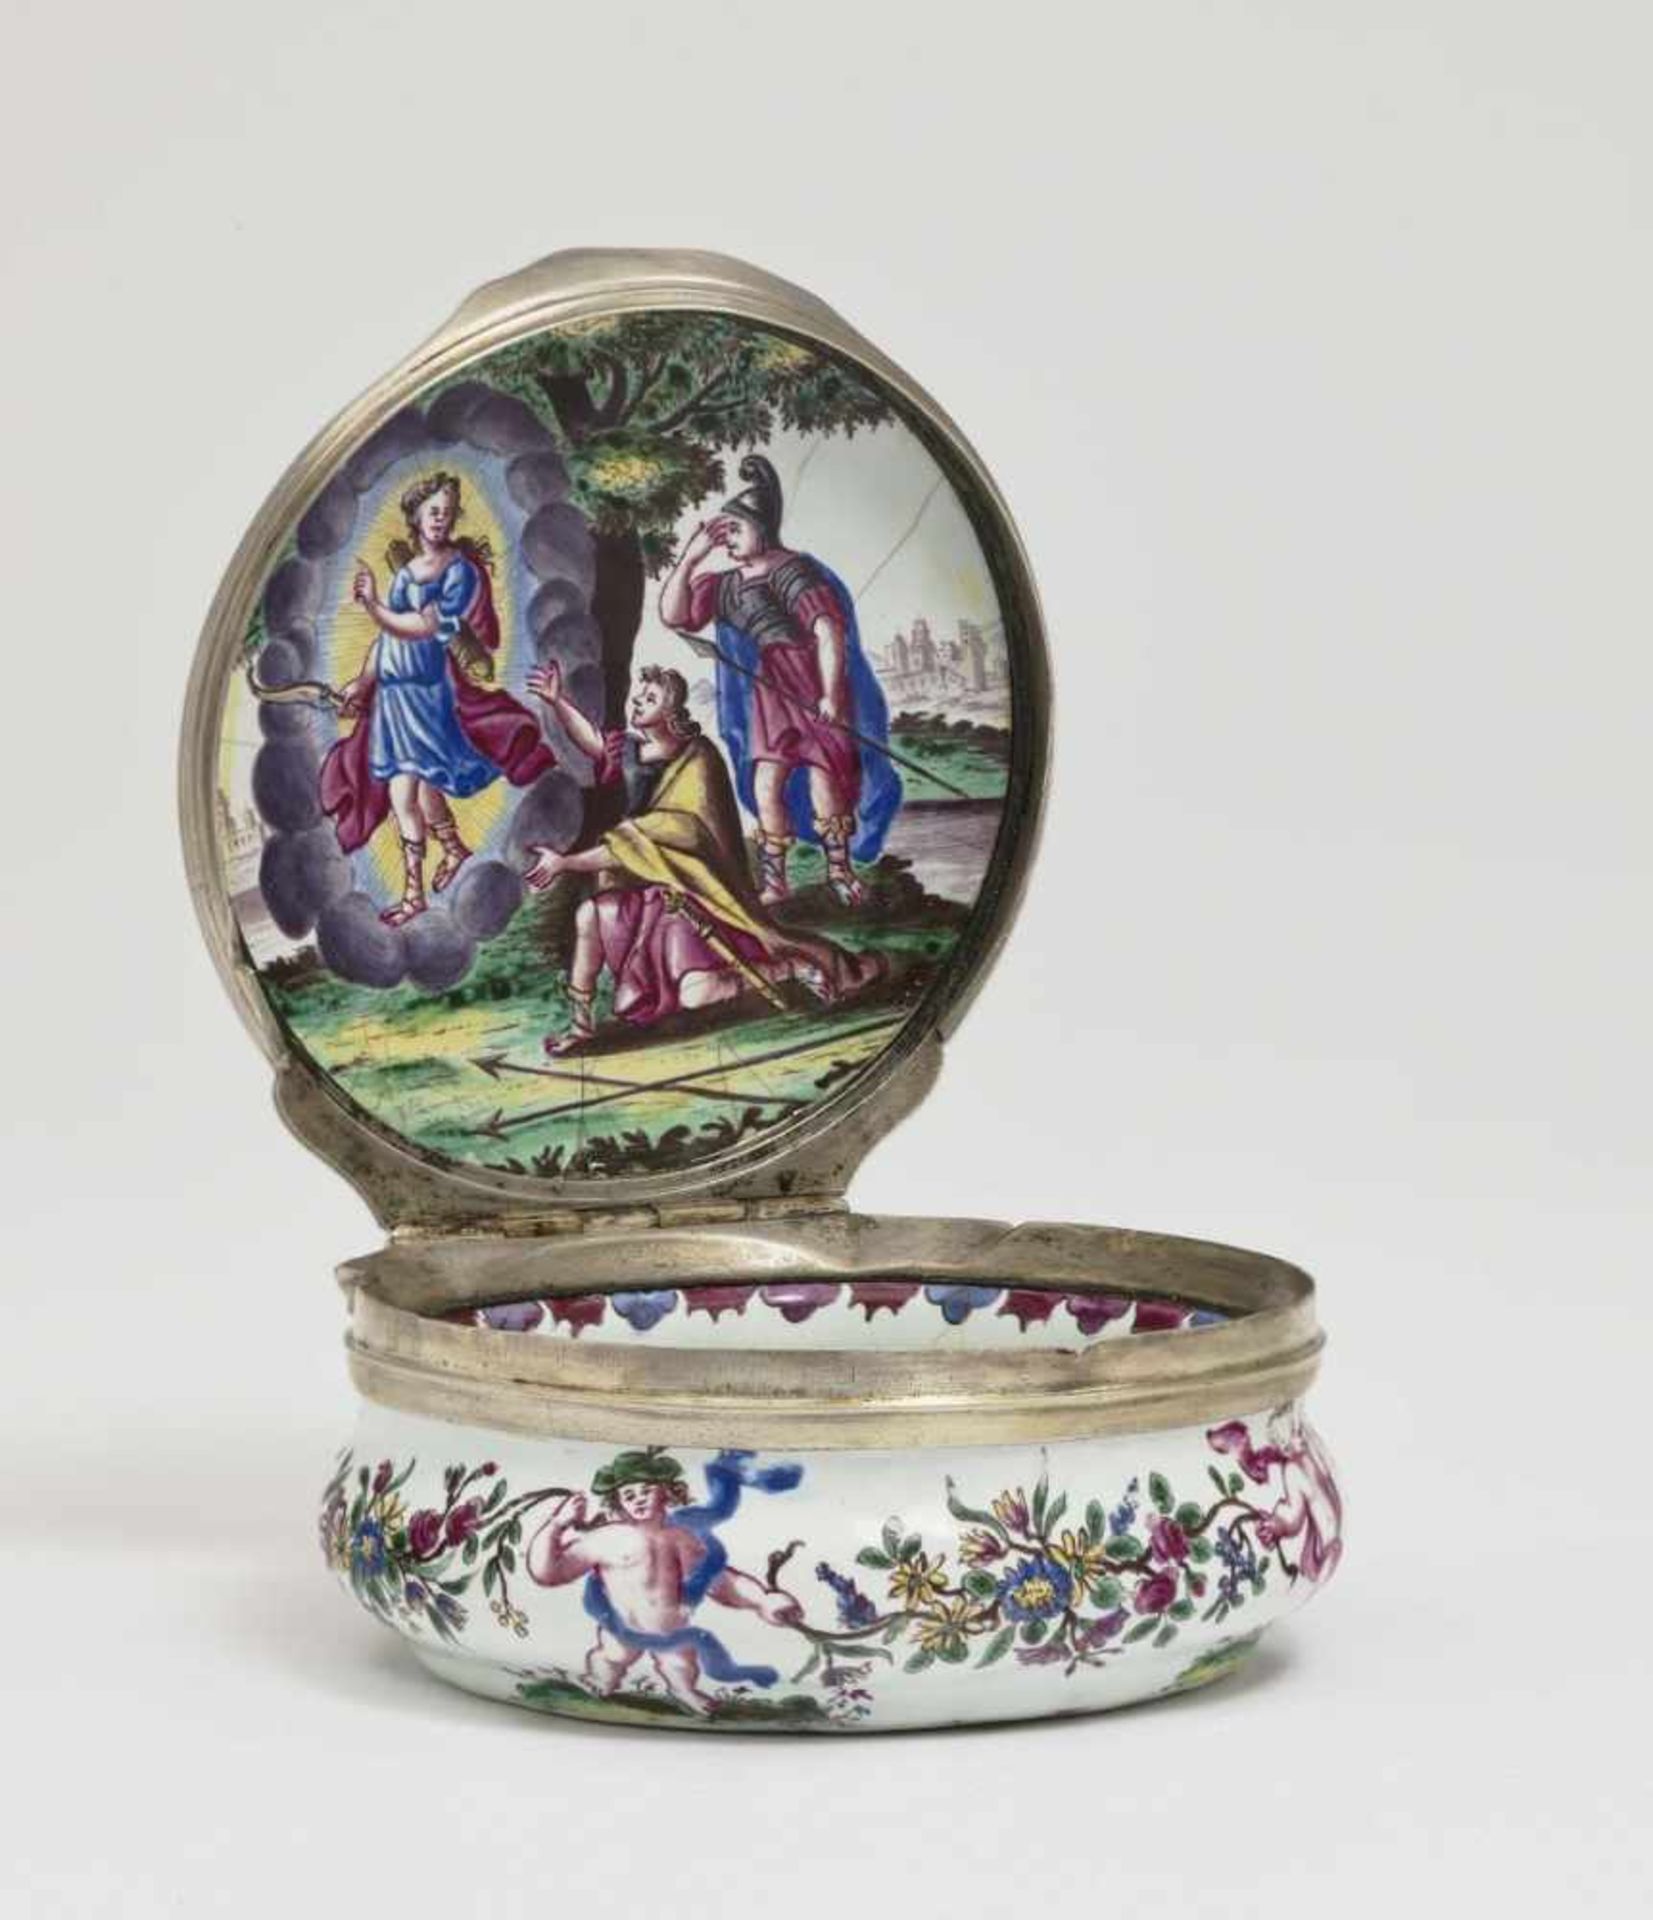 A Snuff BoxGerman (Augsburg), 18th Century Enamel on copper. Silver mount. The lid, monogrammed ''